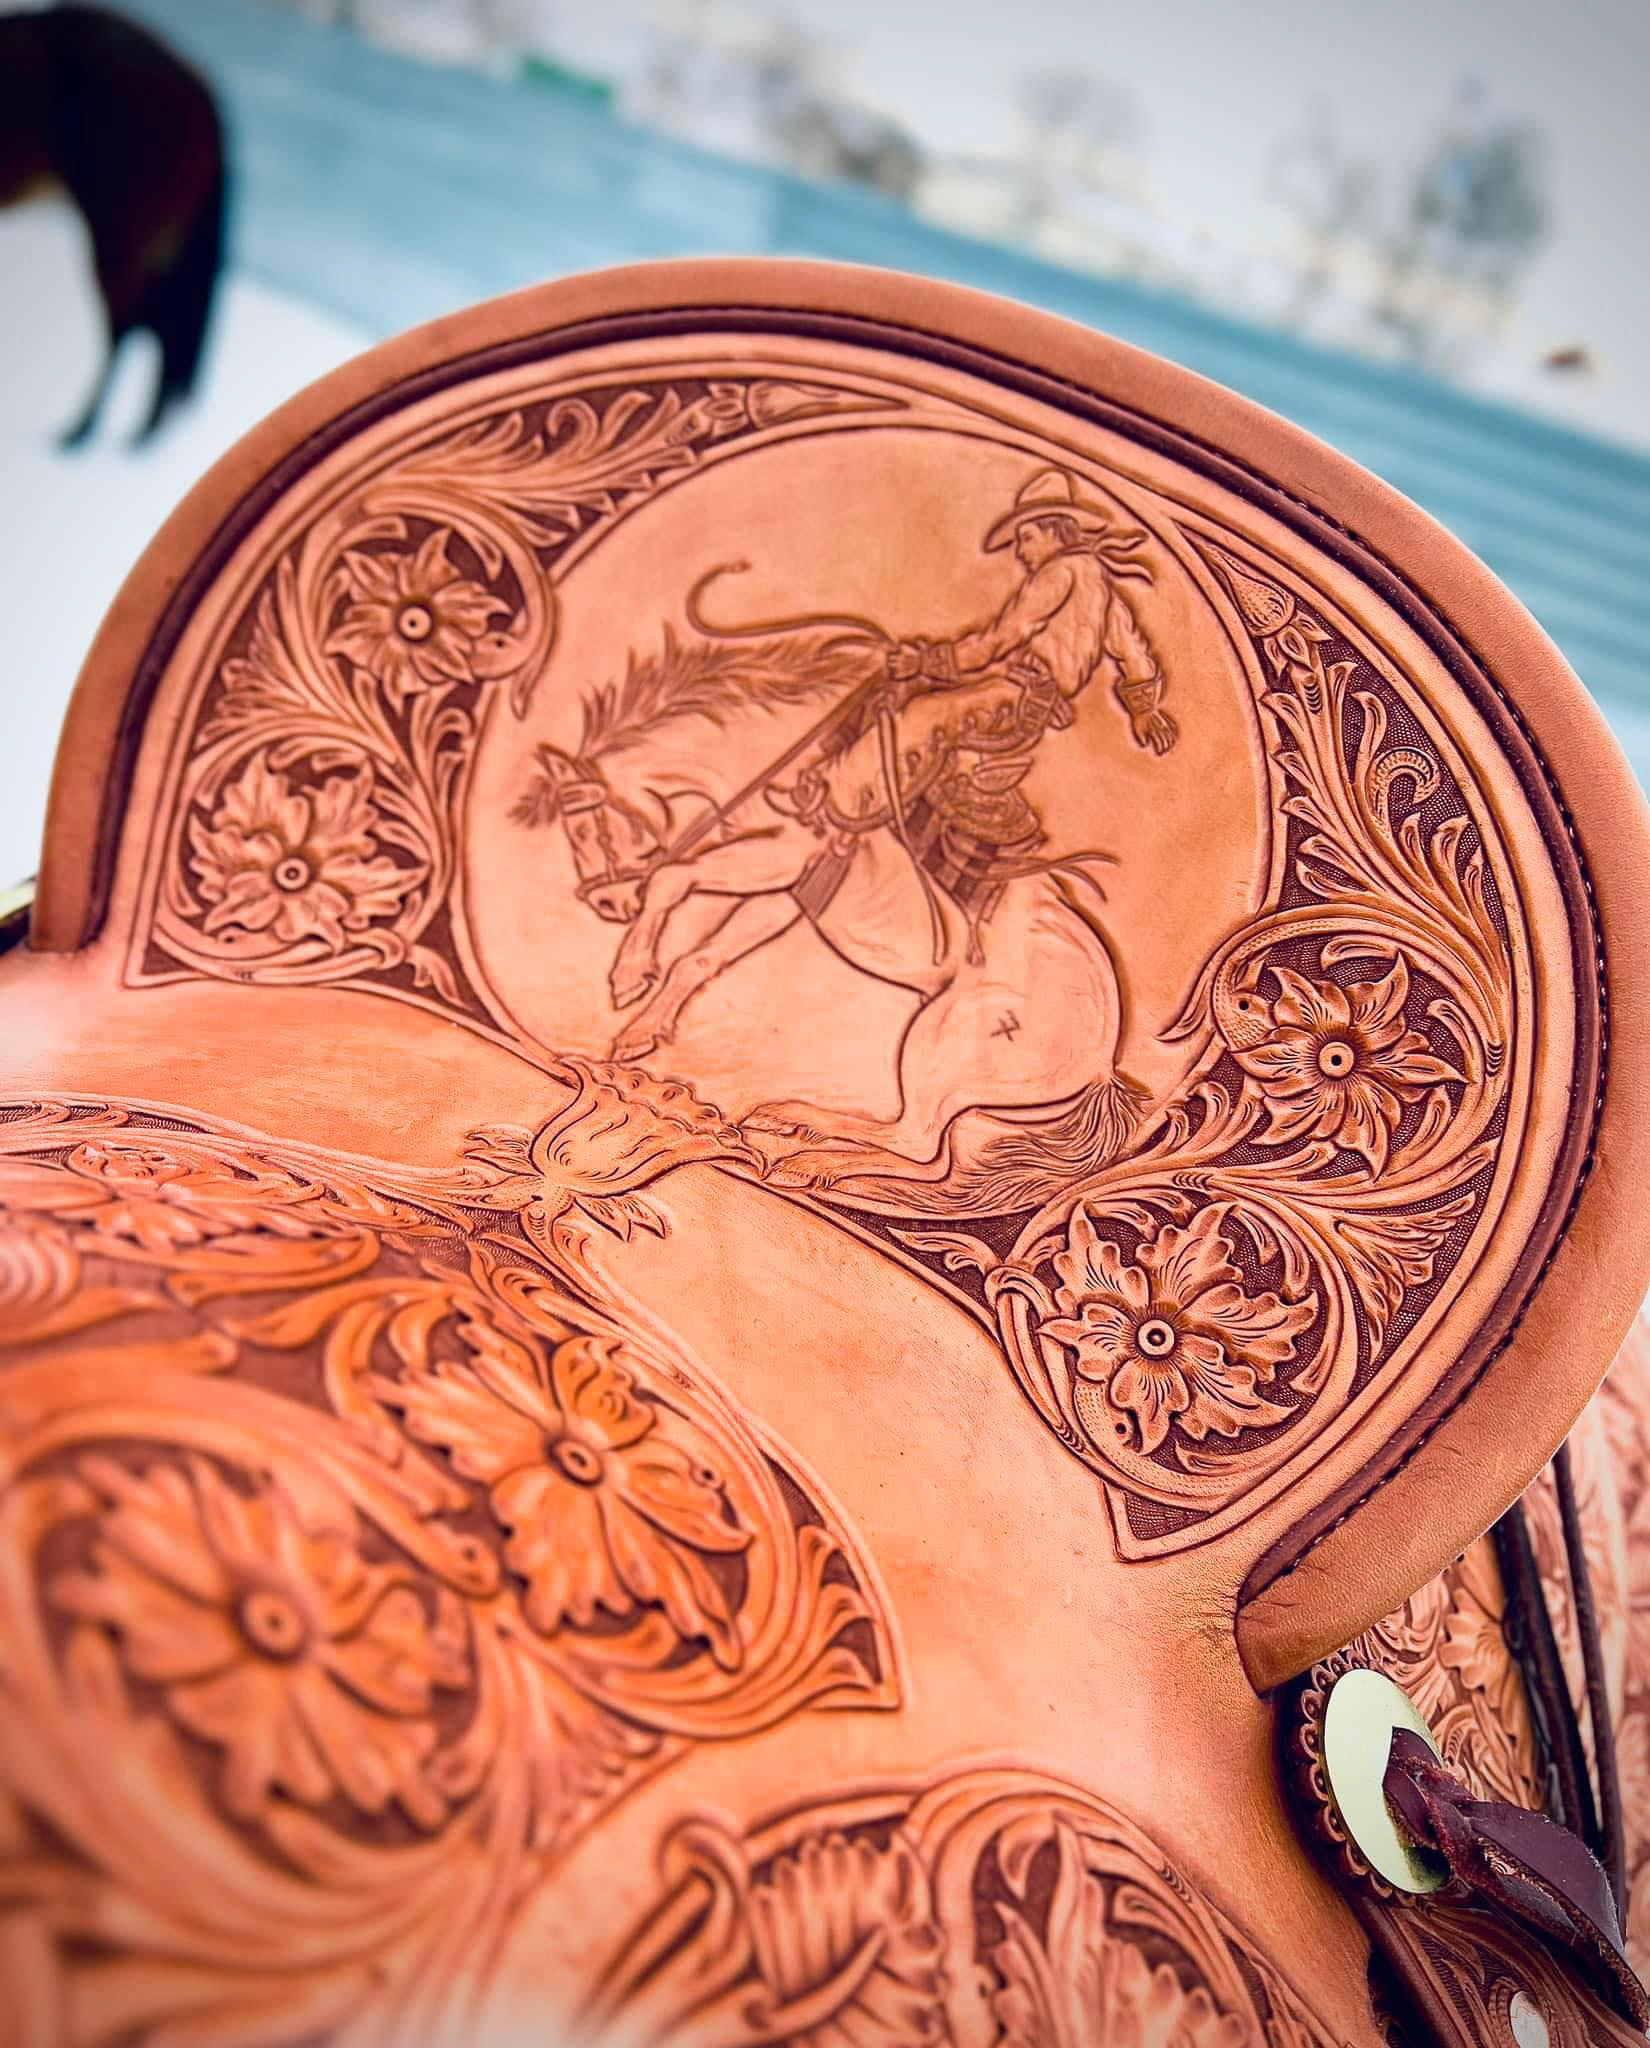 An ornately designed leather saddle with hand-carved patterns of flowers and a drawing of a rider on a horse.